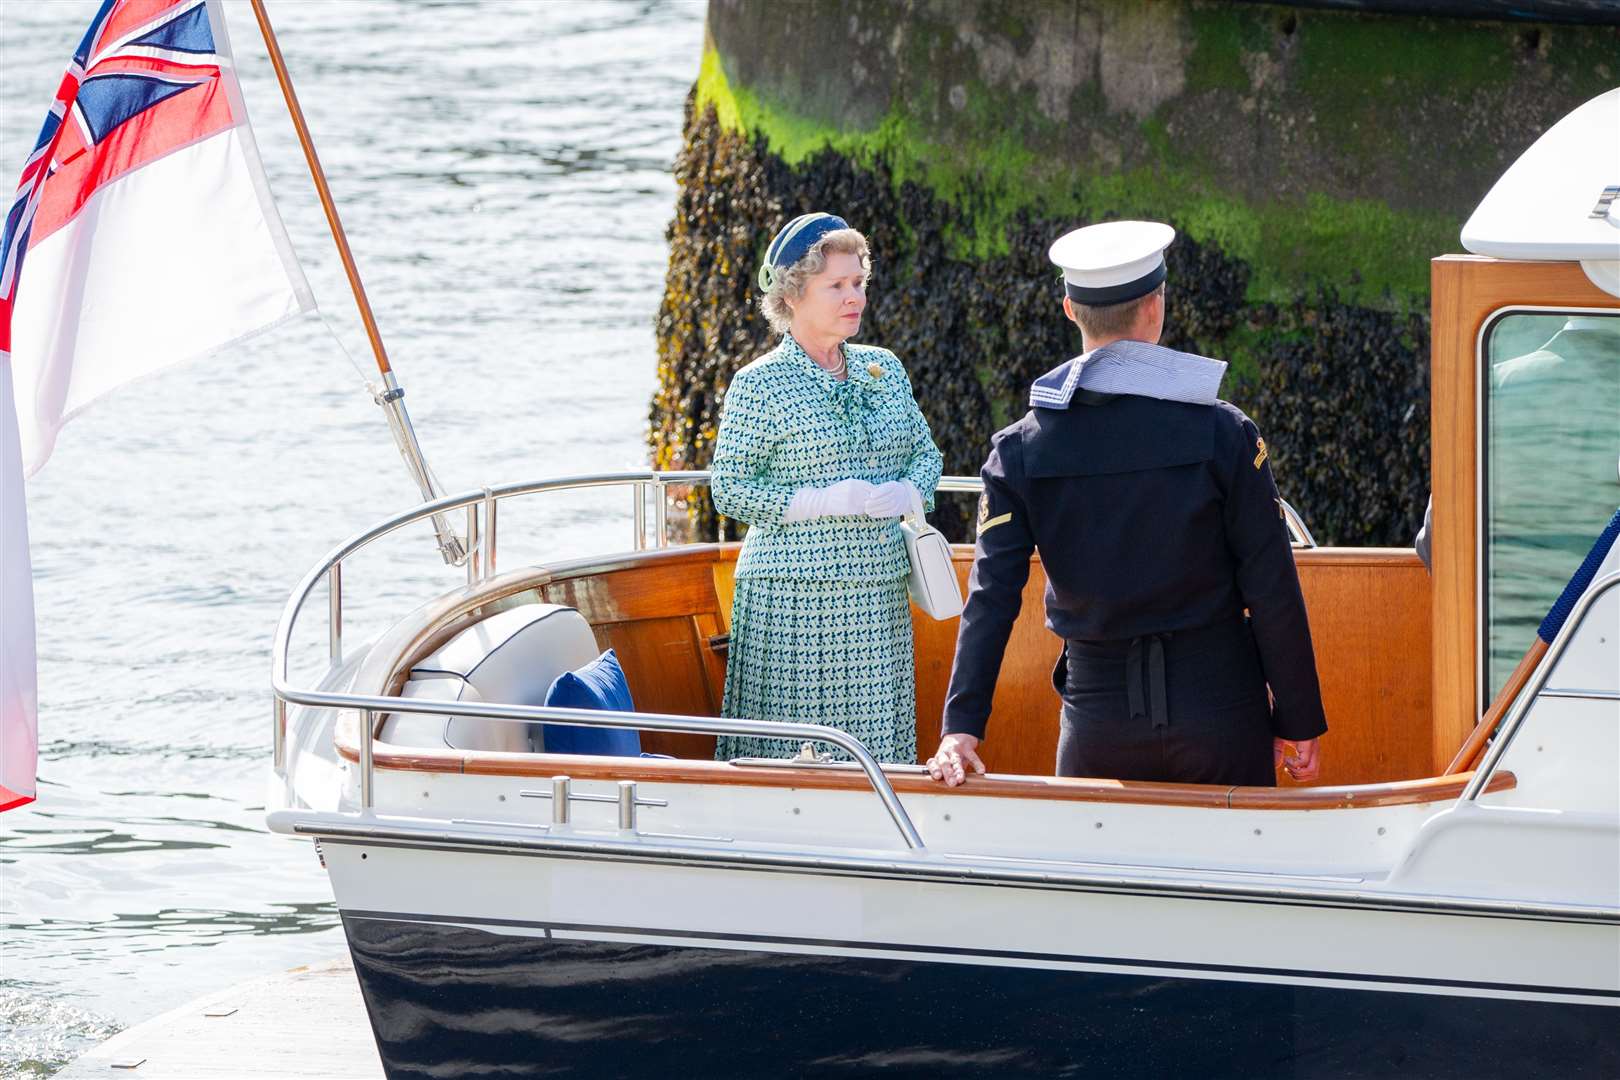 Imelda Staunton, playing the part of Queen Elizabeth II, during filming for Netflix drama The Crown at Macduff Harbour in August. Picture: Daniel Forsyth.